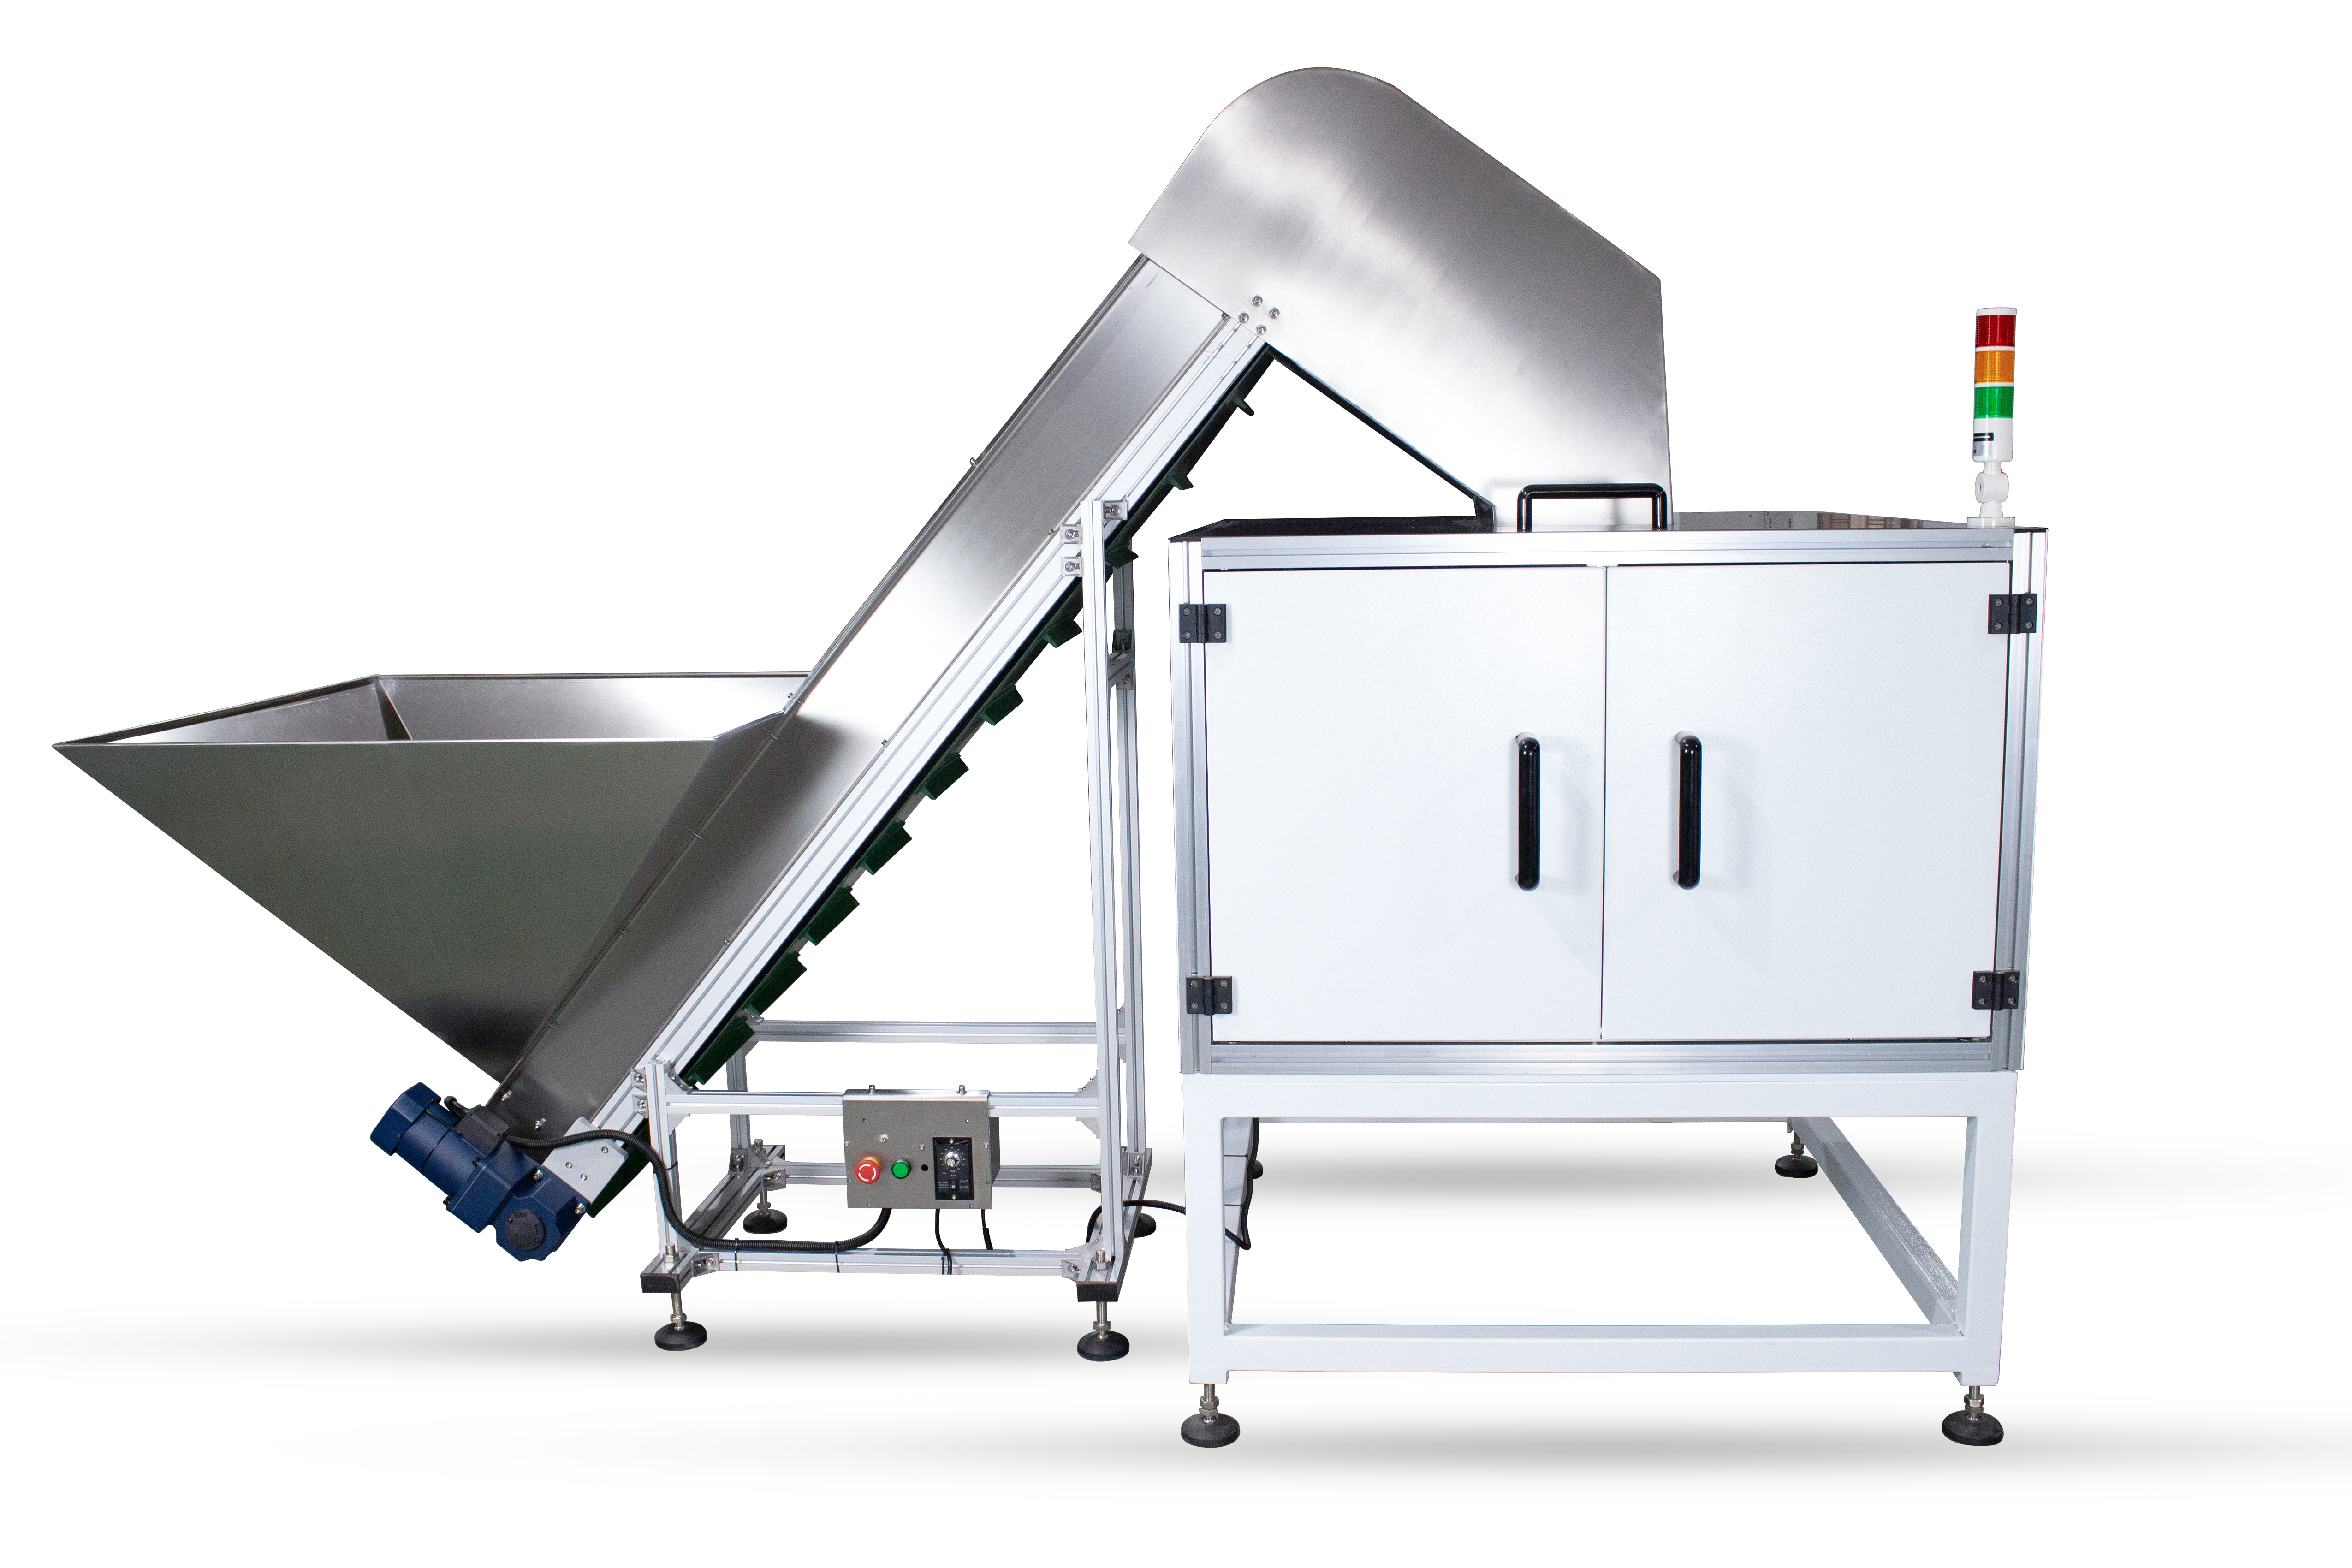 Live at interpack: Cremer Launches Compact Counting & Dispensing Machine | Packaging World